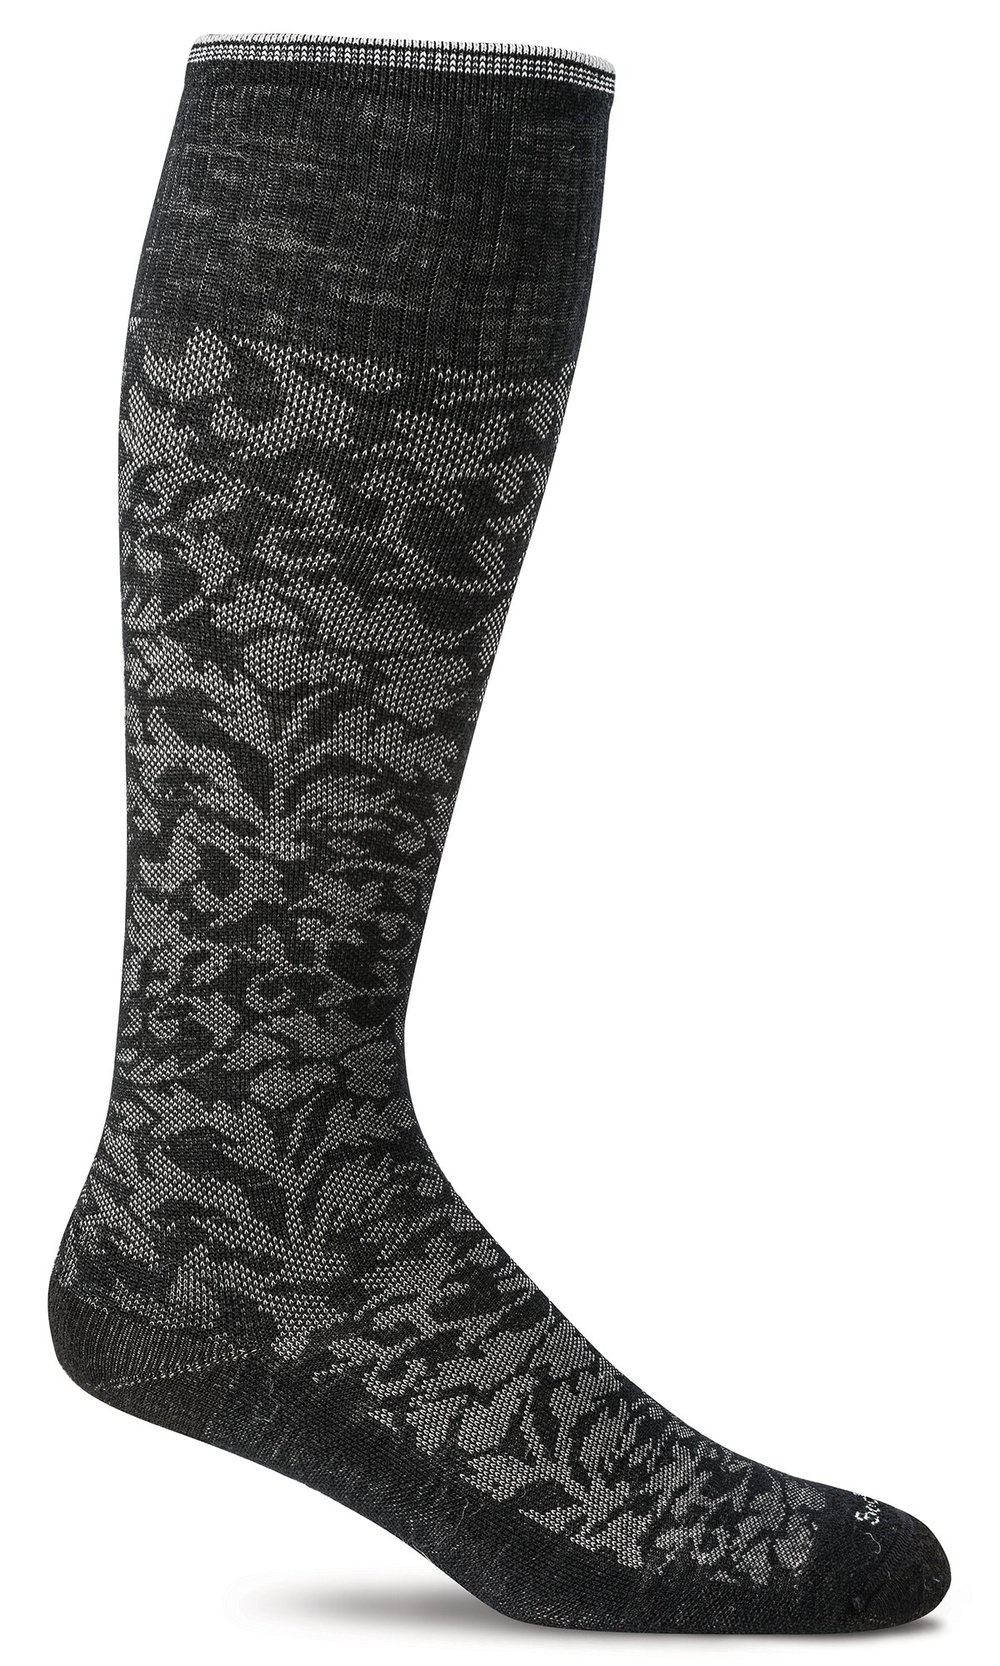 Sockwell - Moderate Lifestyle Compression Damask SW16W Black Women's